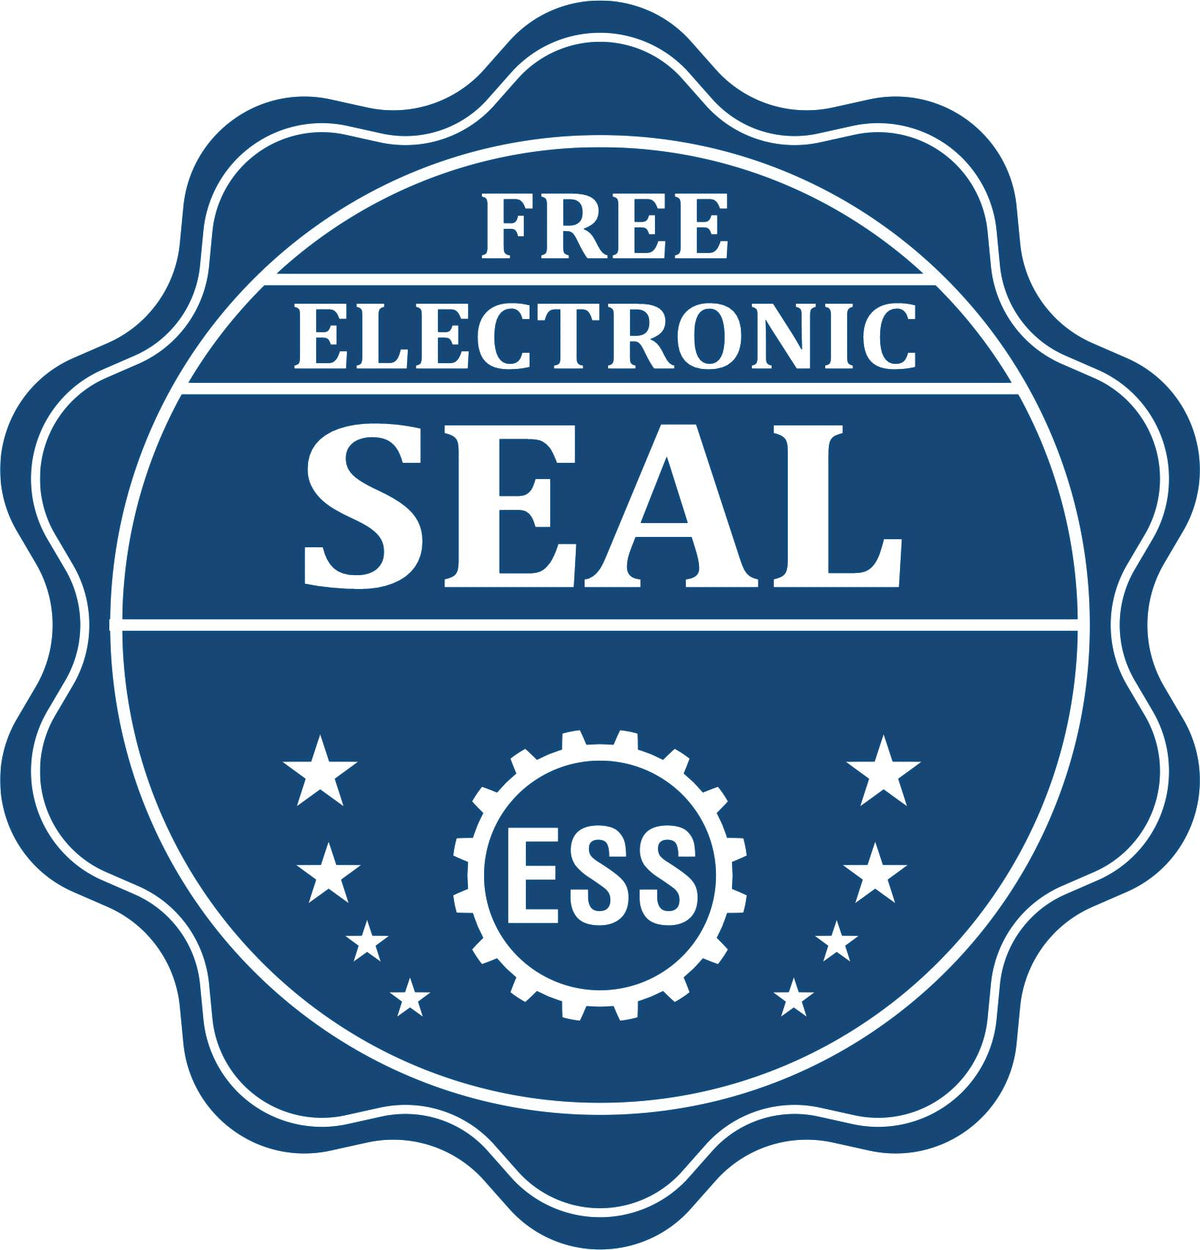 A badge showing a free electronic seal for the Heavy-Duty Louisiana Rectangular Notary Stamp with stars and the ESS gear on the emblem.